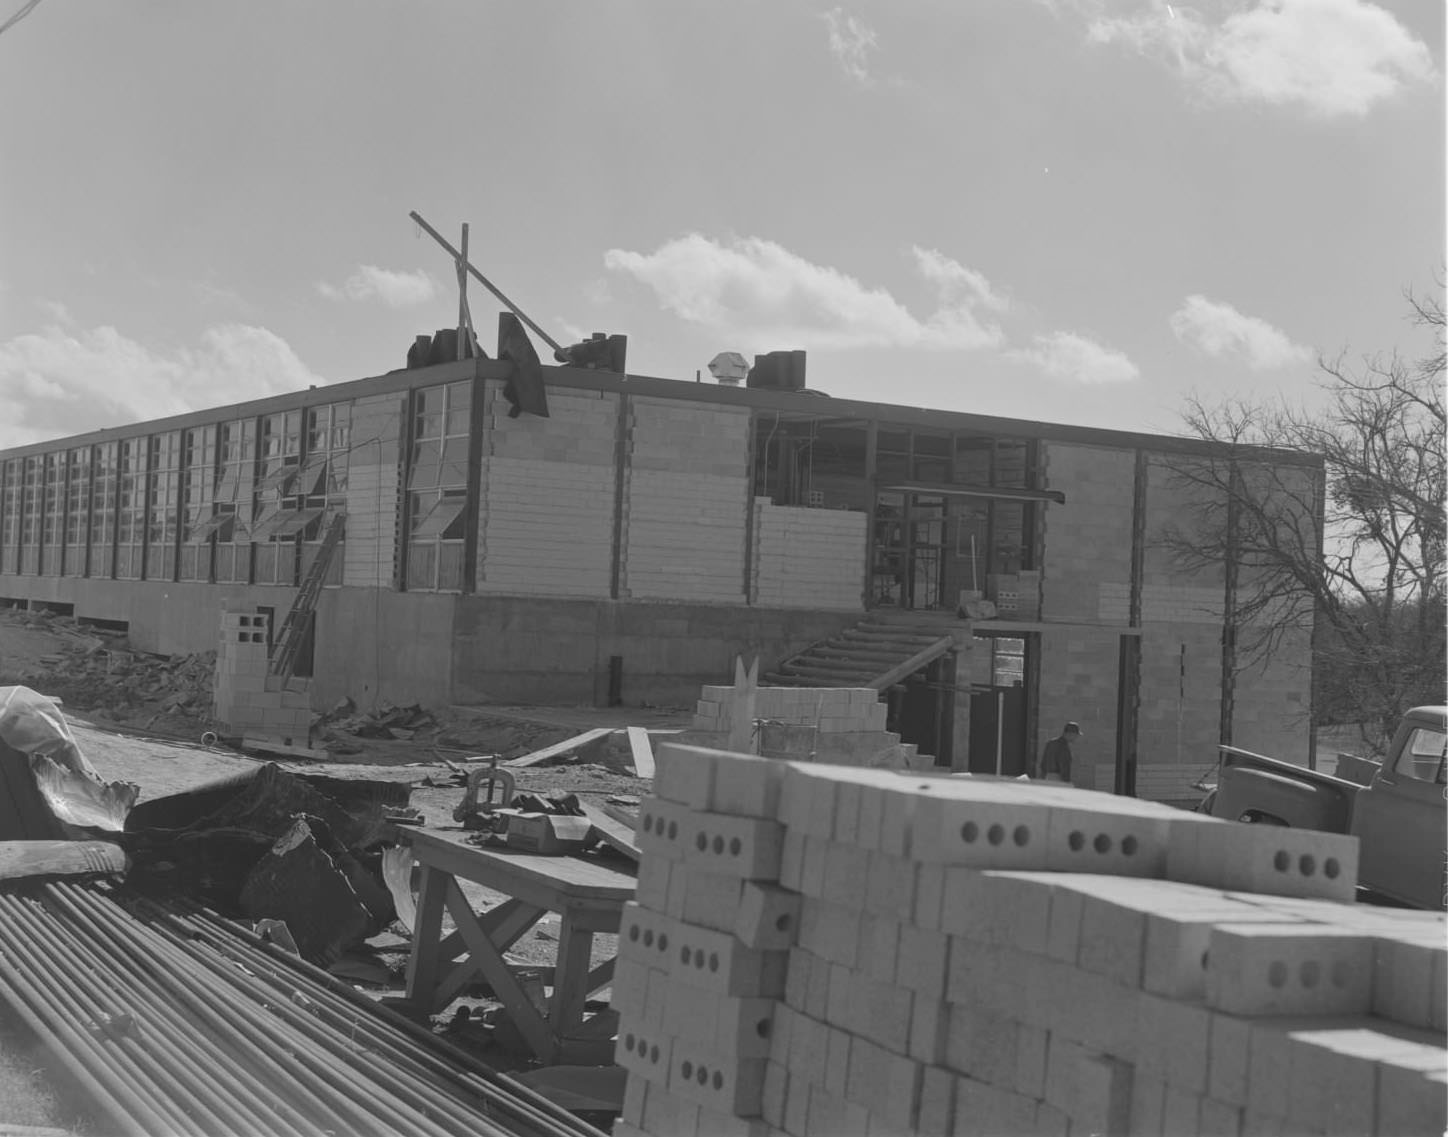 Bricks in front of the construction of Pearce Jr. High School, 1961